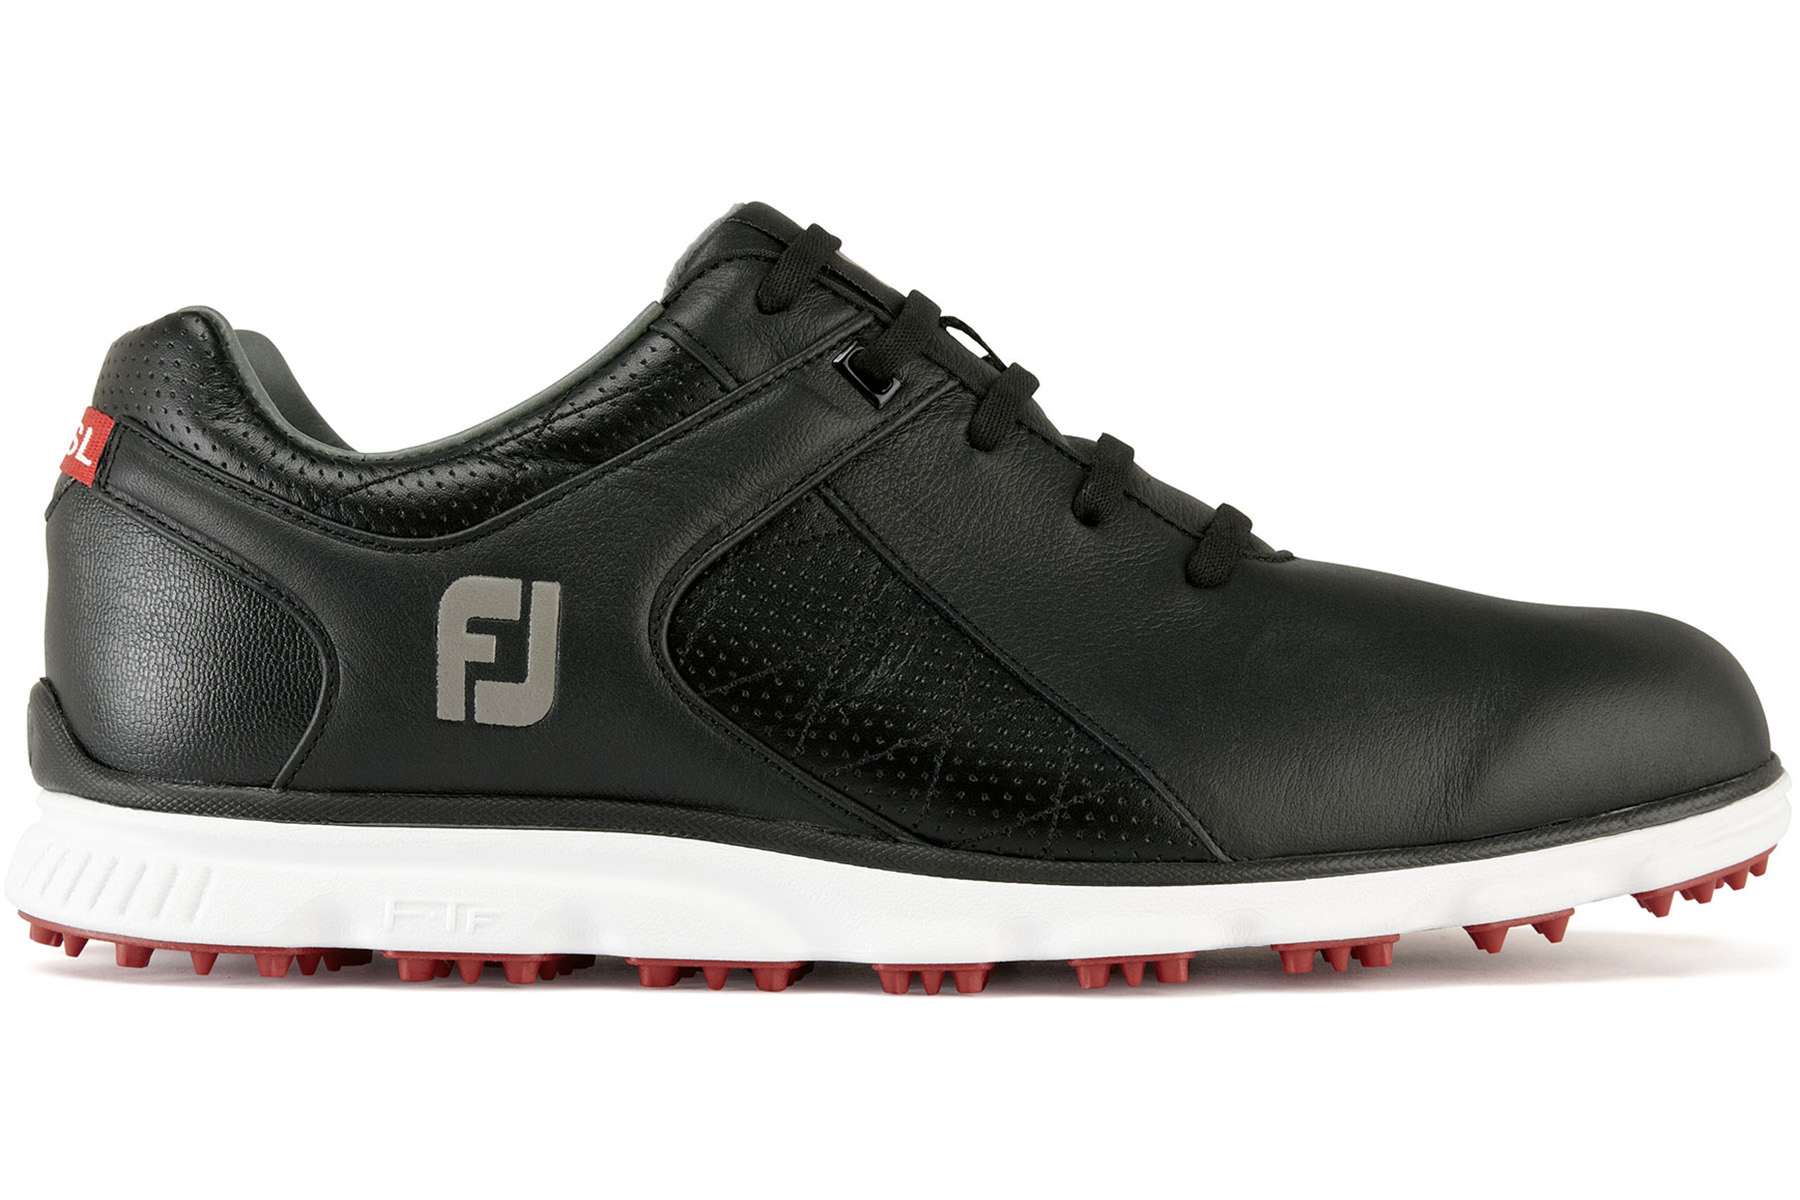 FootJoy Pro/SL Shoes from american golf